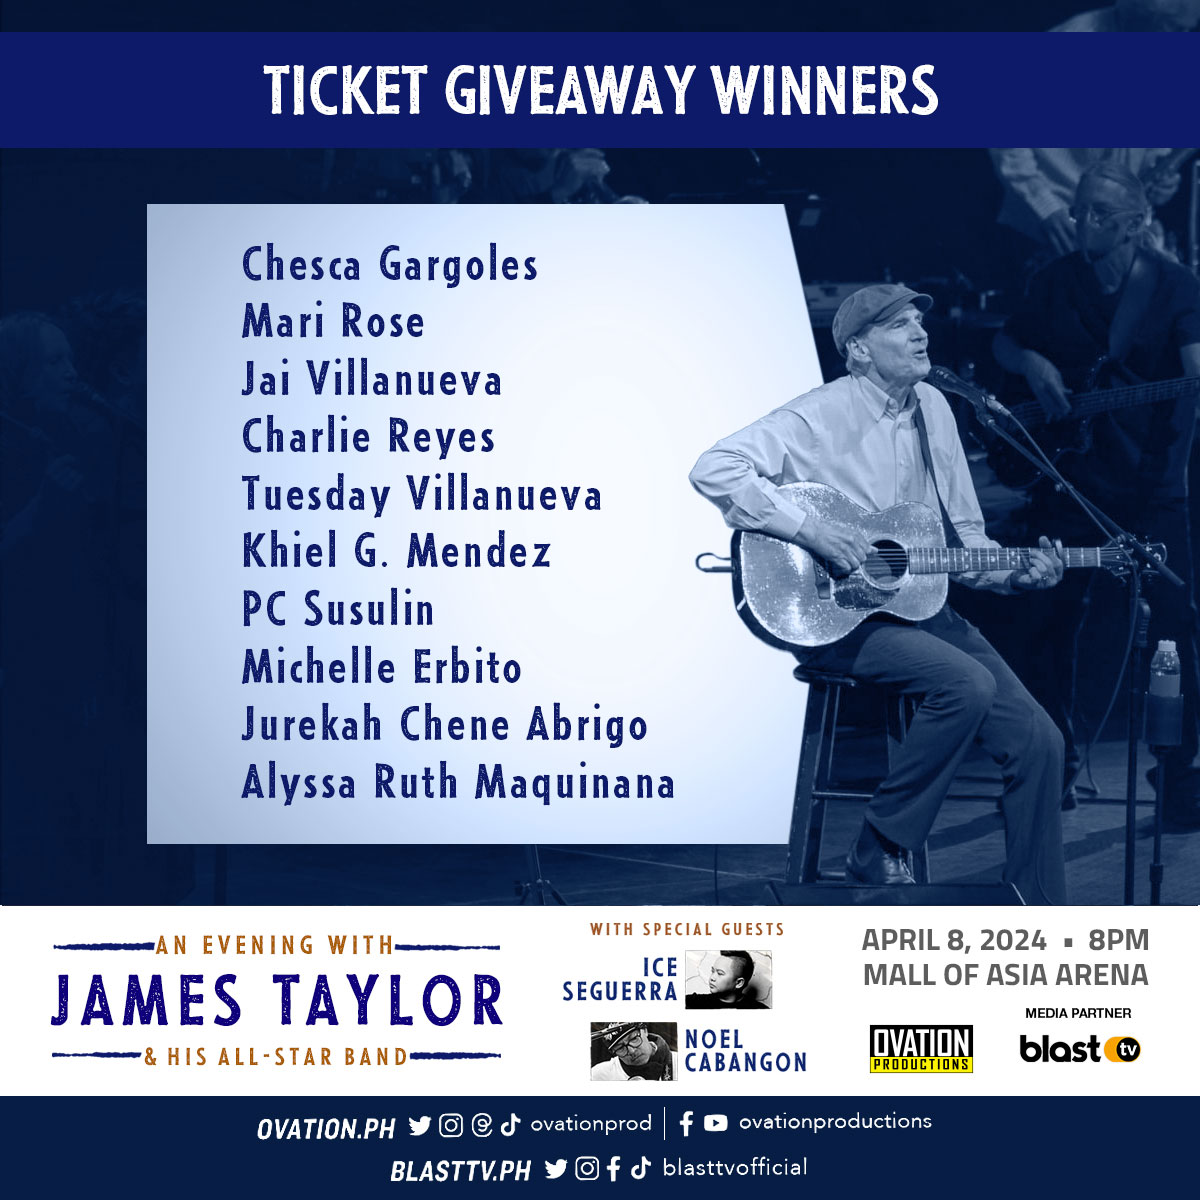 Congratulations to the winners of the James Taylor Giveaway! Please send a message to Ovation Productions page to claim your prize.